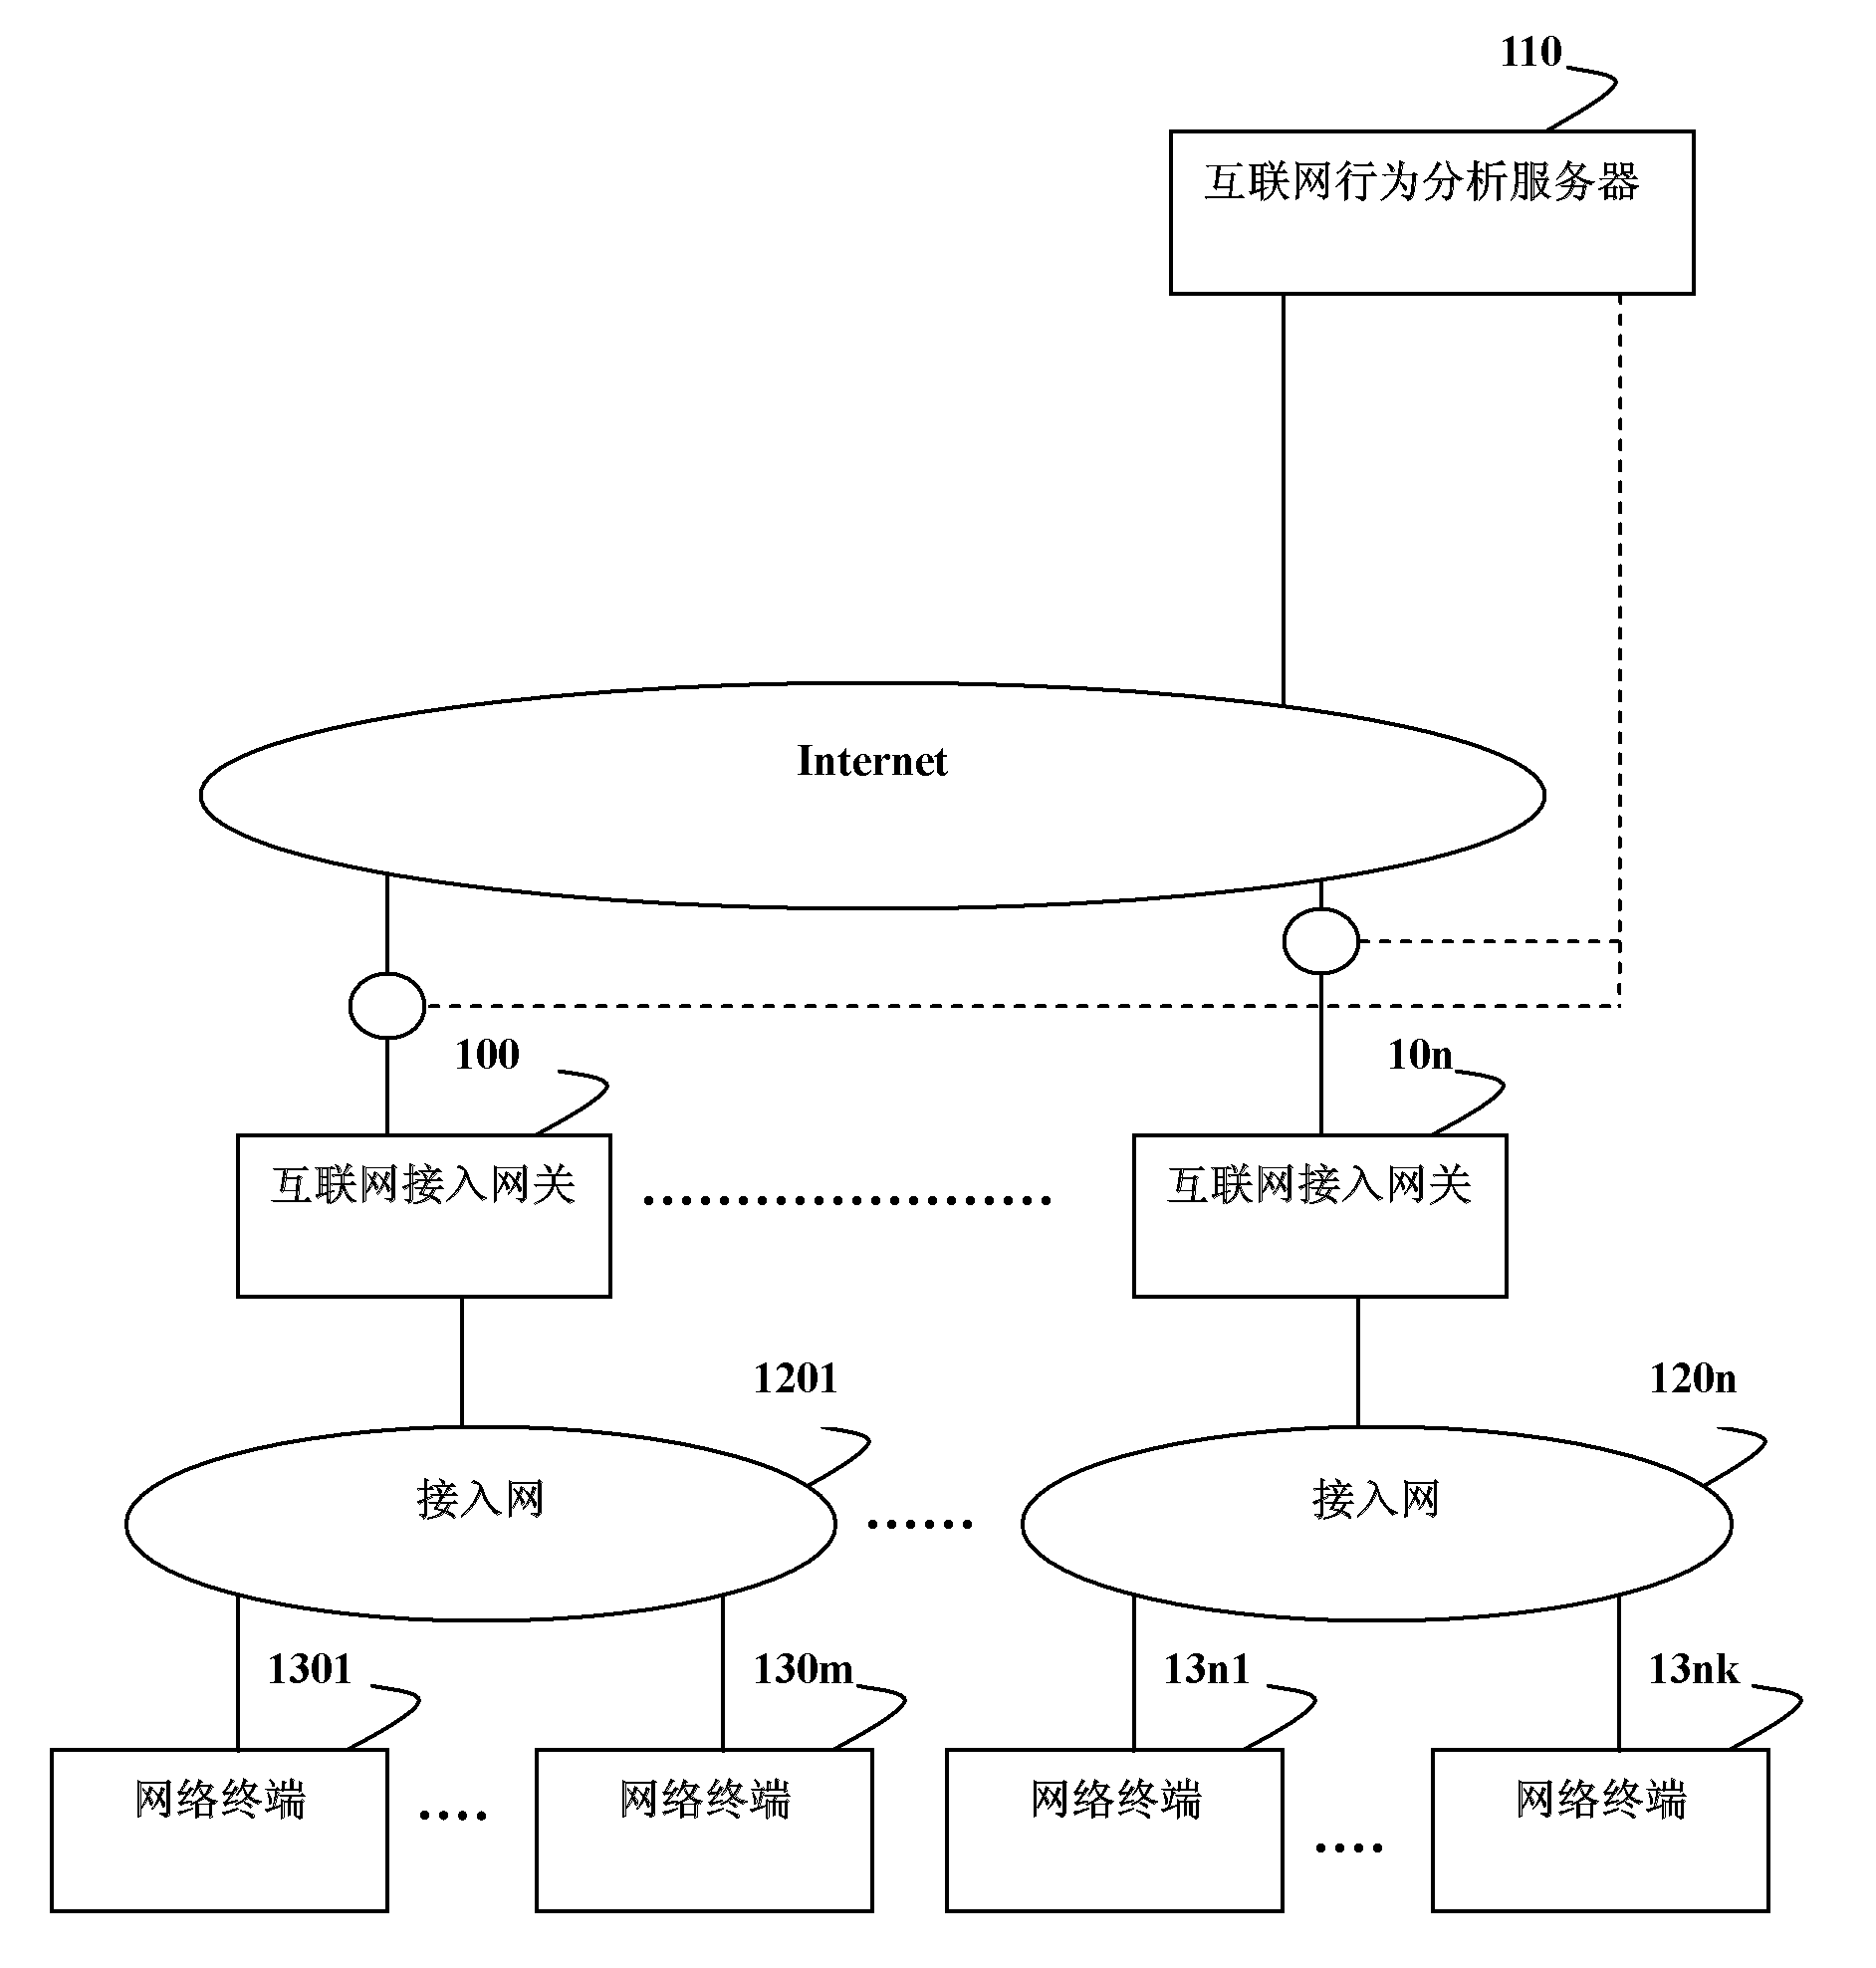 Method and system for extracting Internet user network behaviors